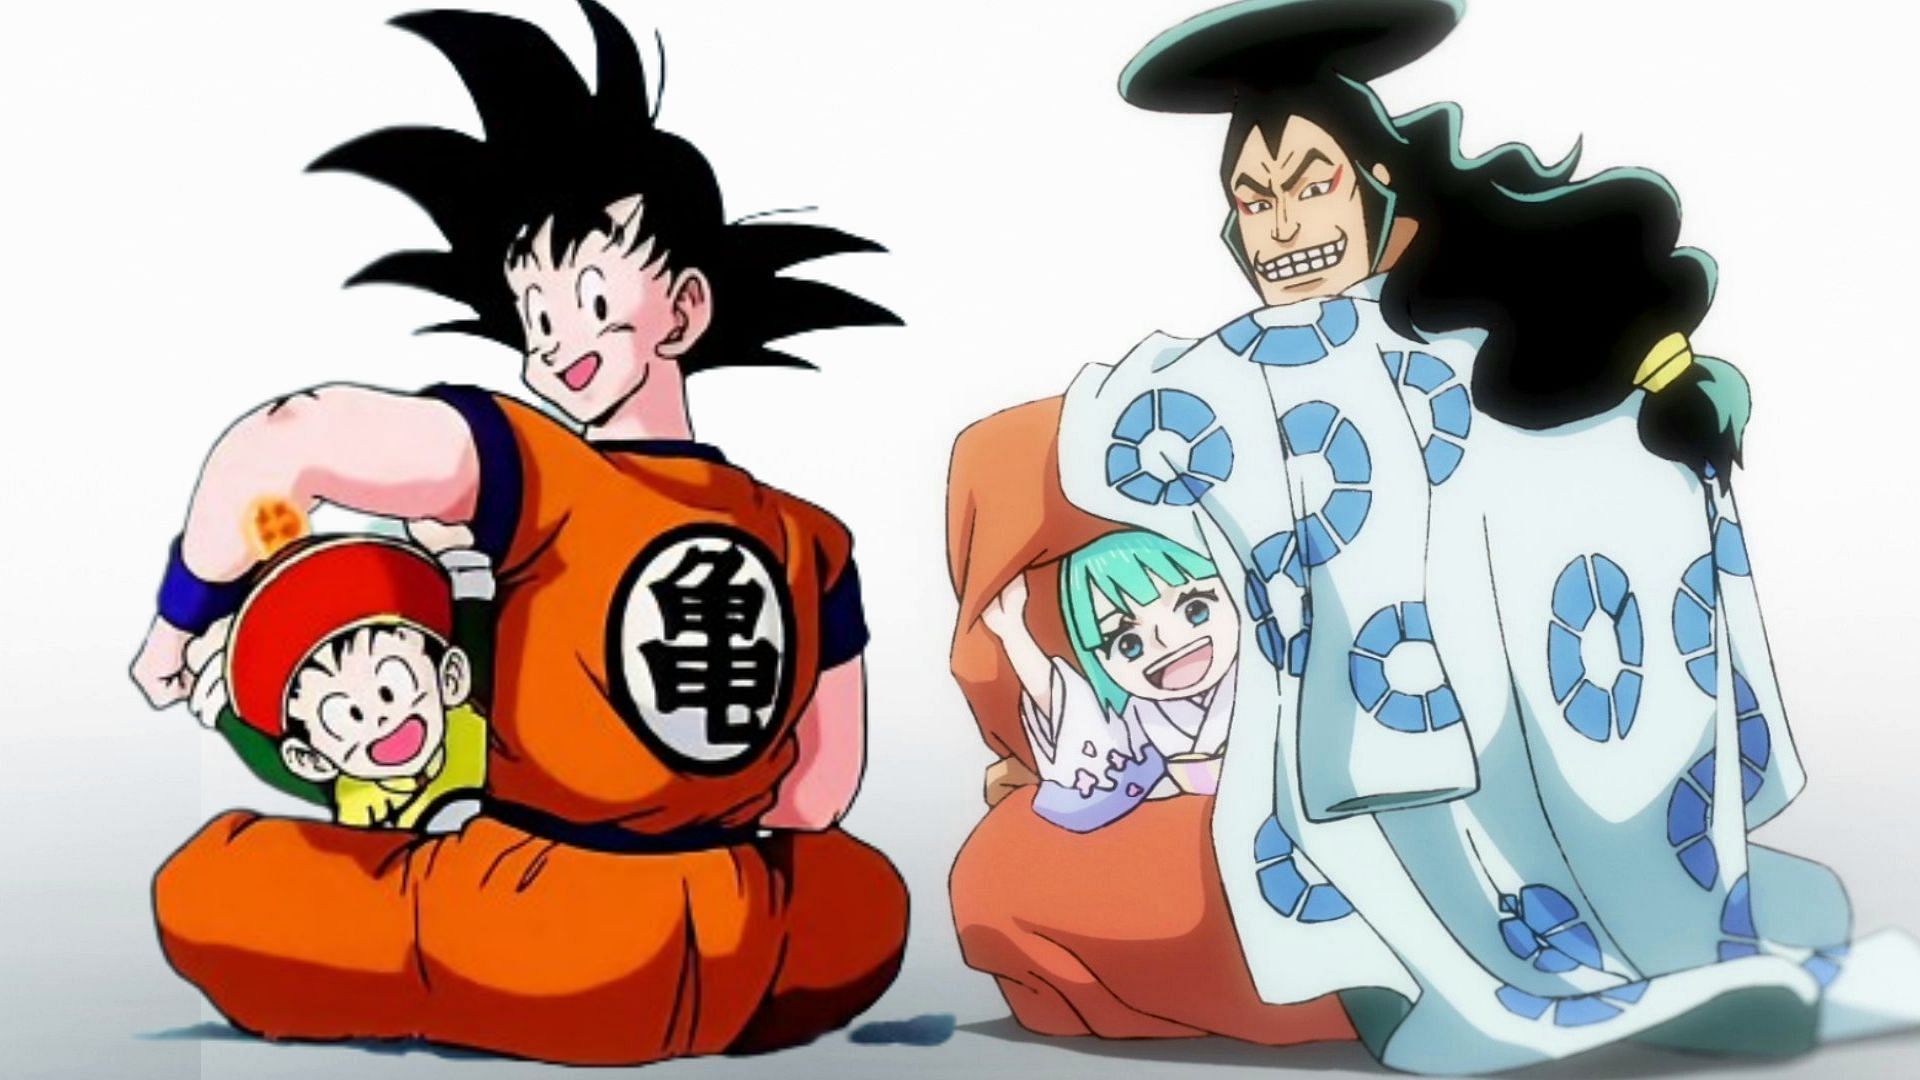 Hype on X: One Piece Episode 1066 Referenced Dragon Ball